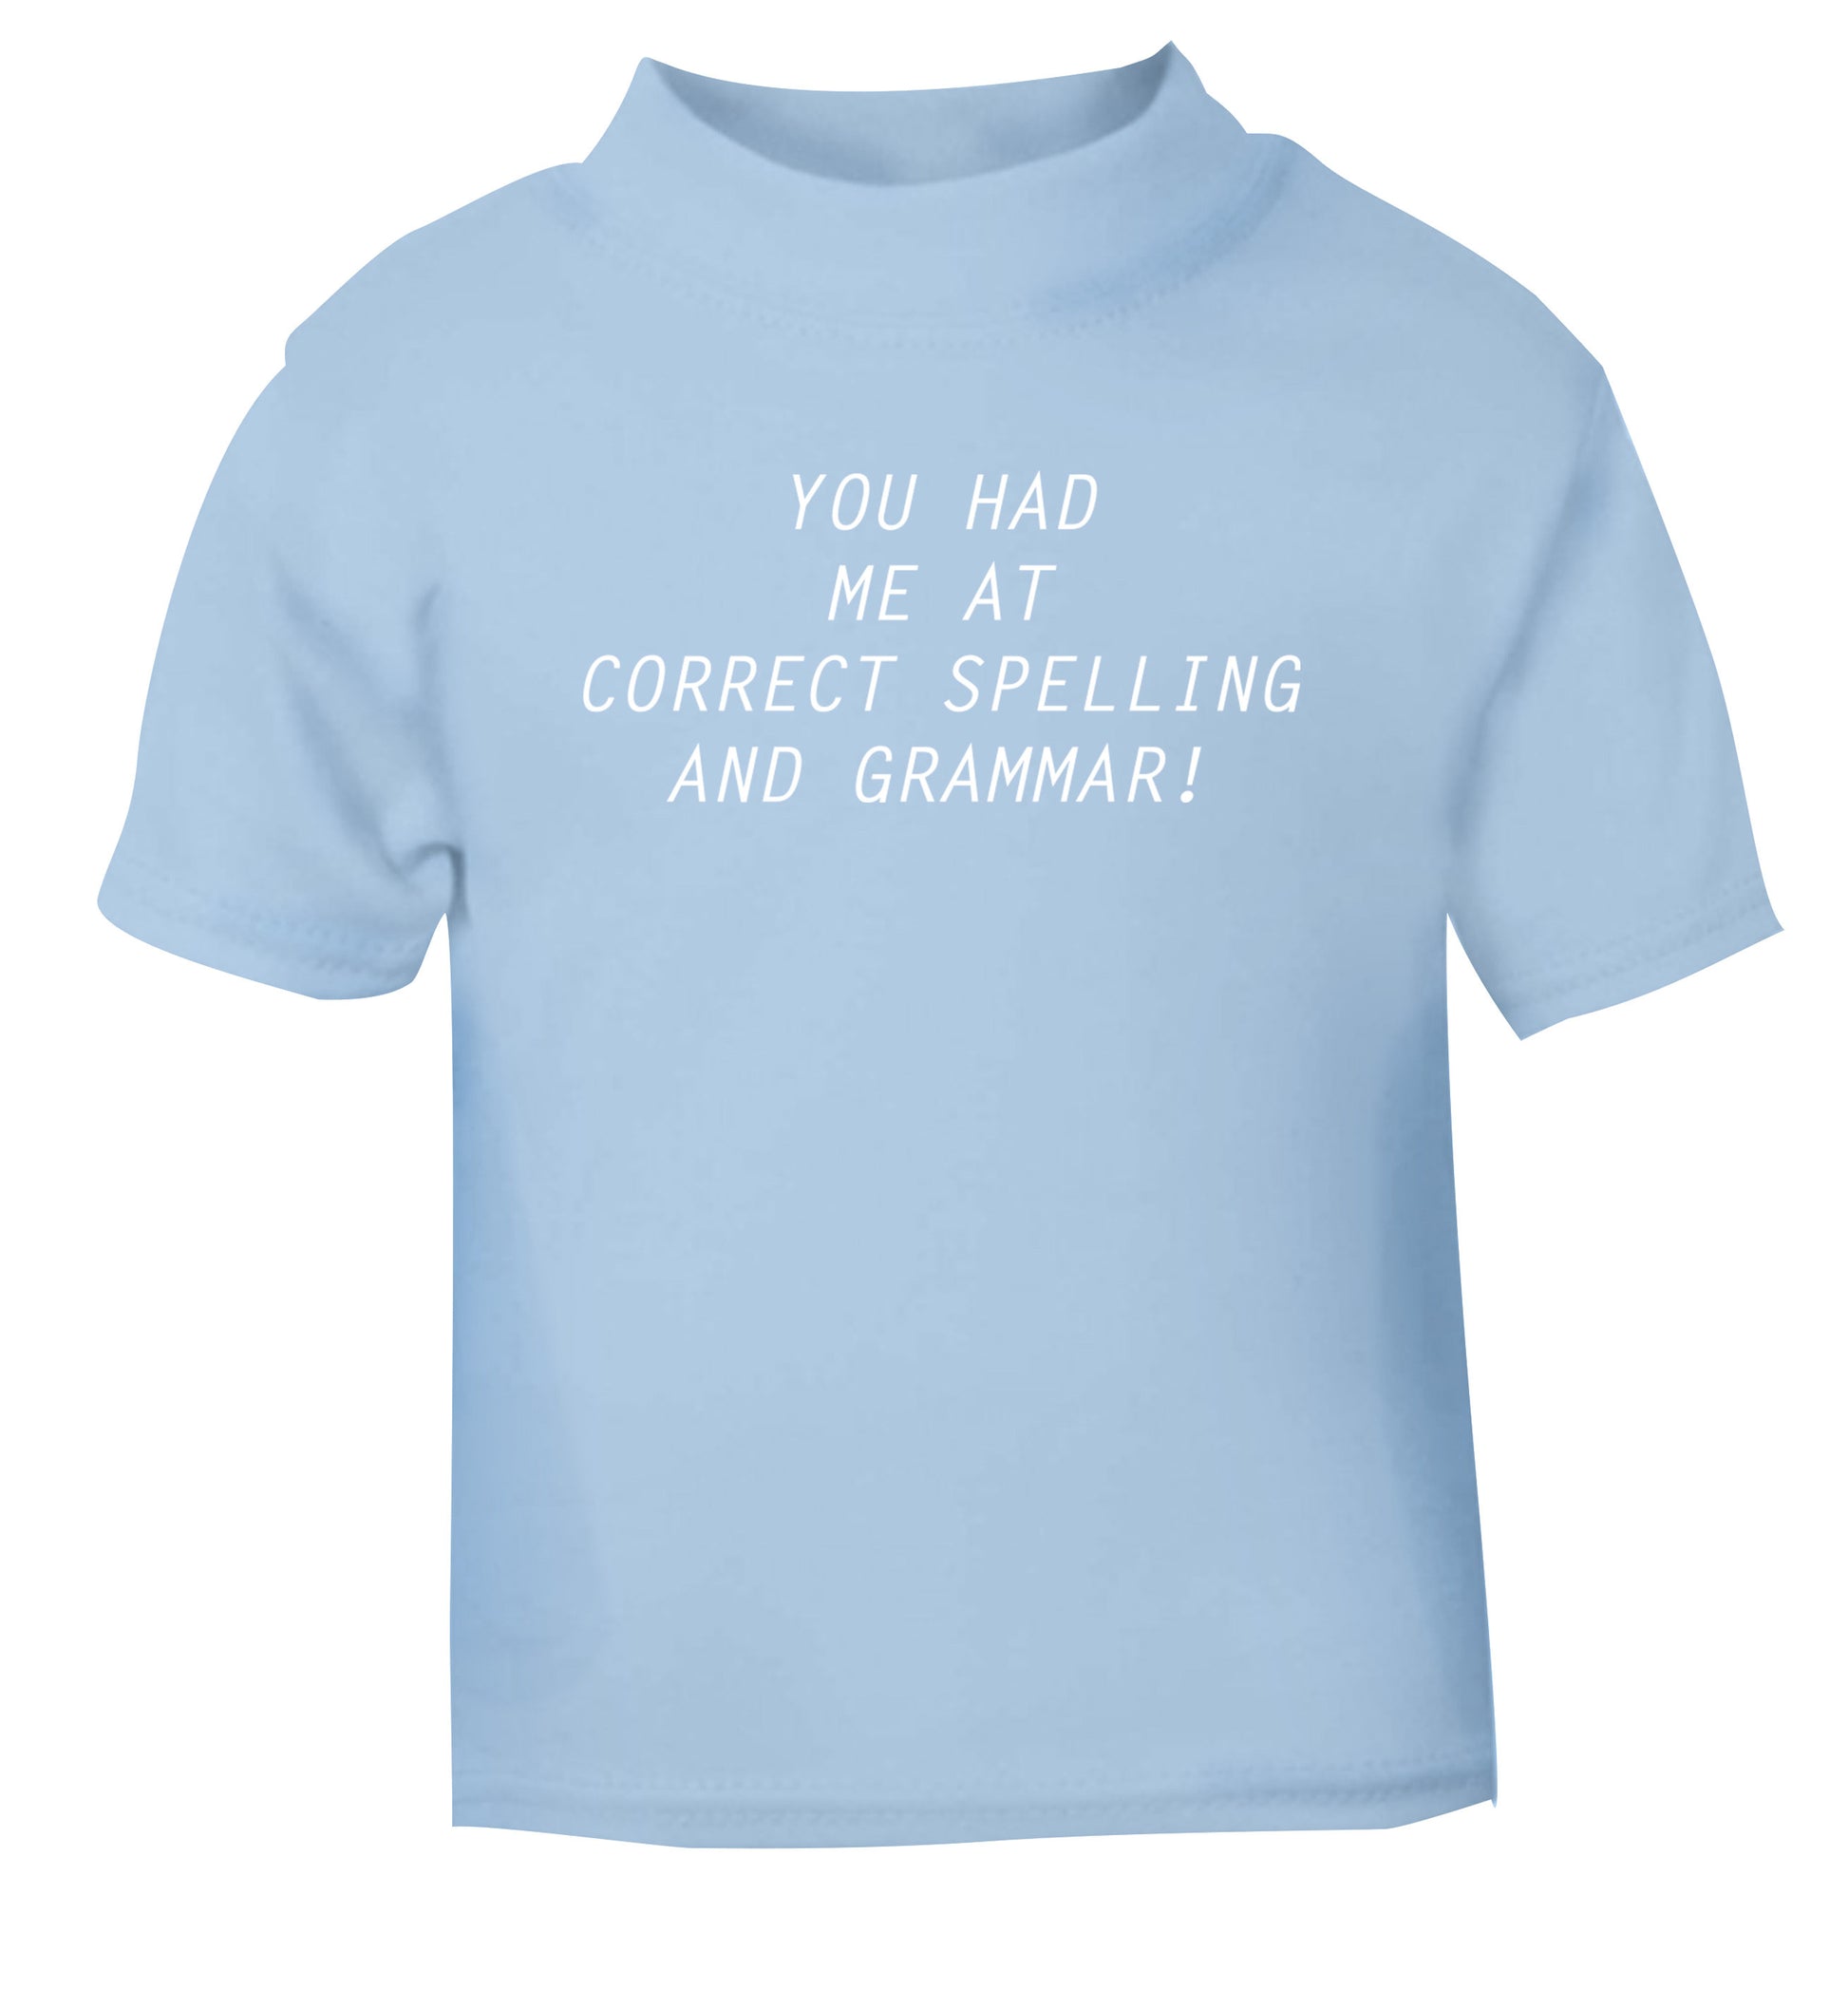 You had me at correct spelling and grammar light blue Baby Toddler Tshirt 2 Years